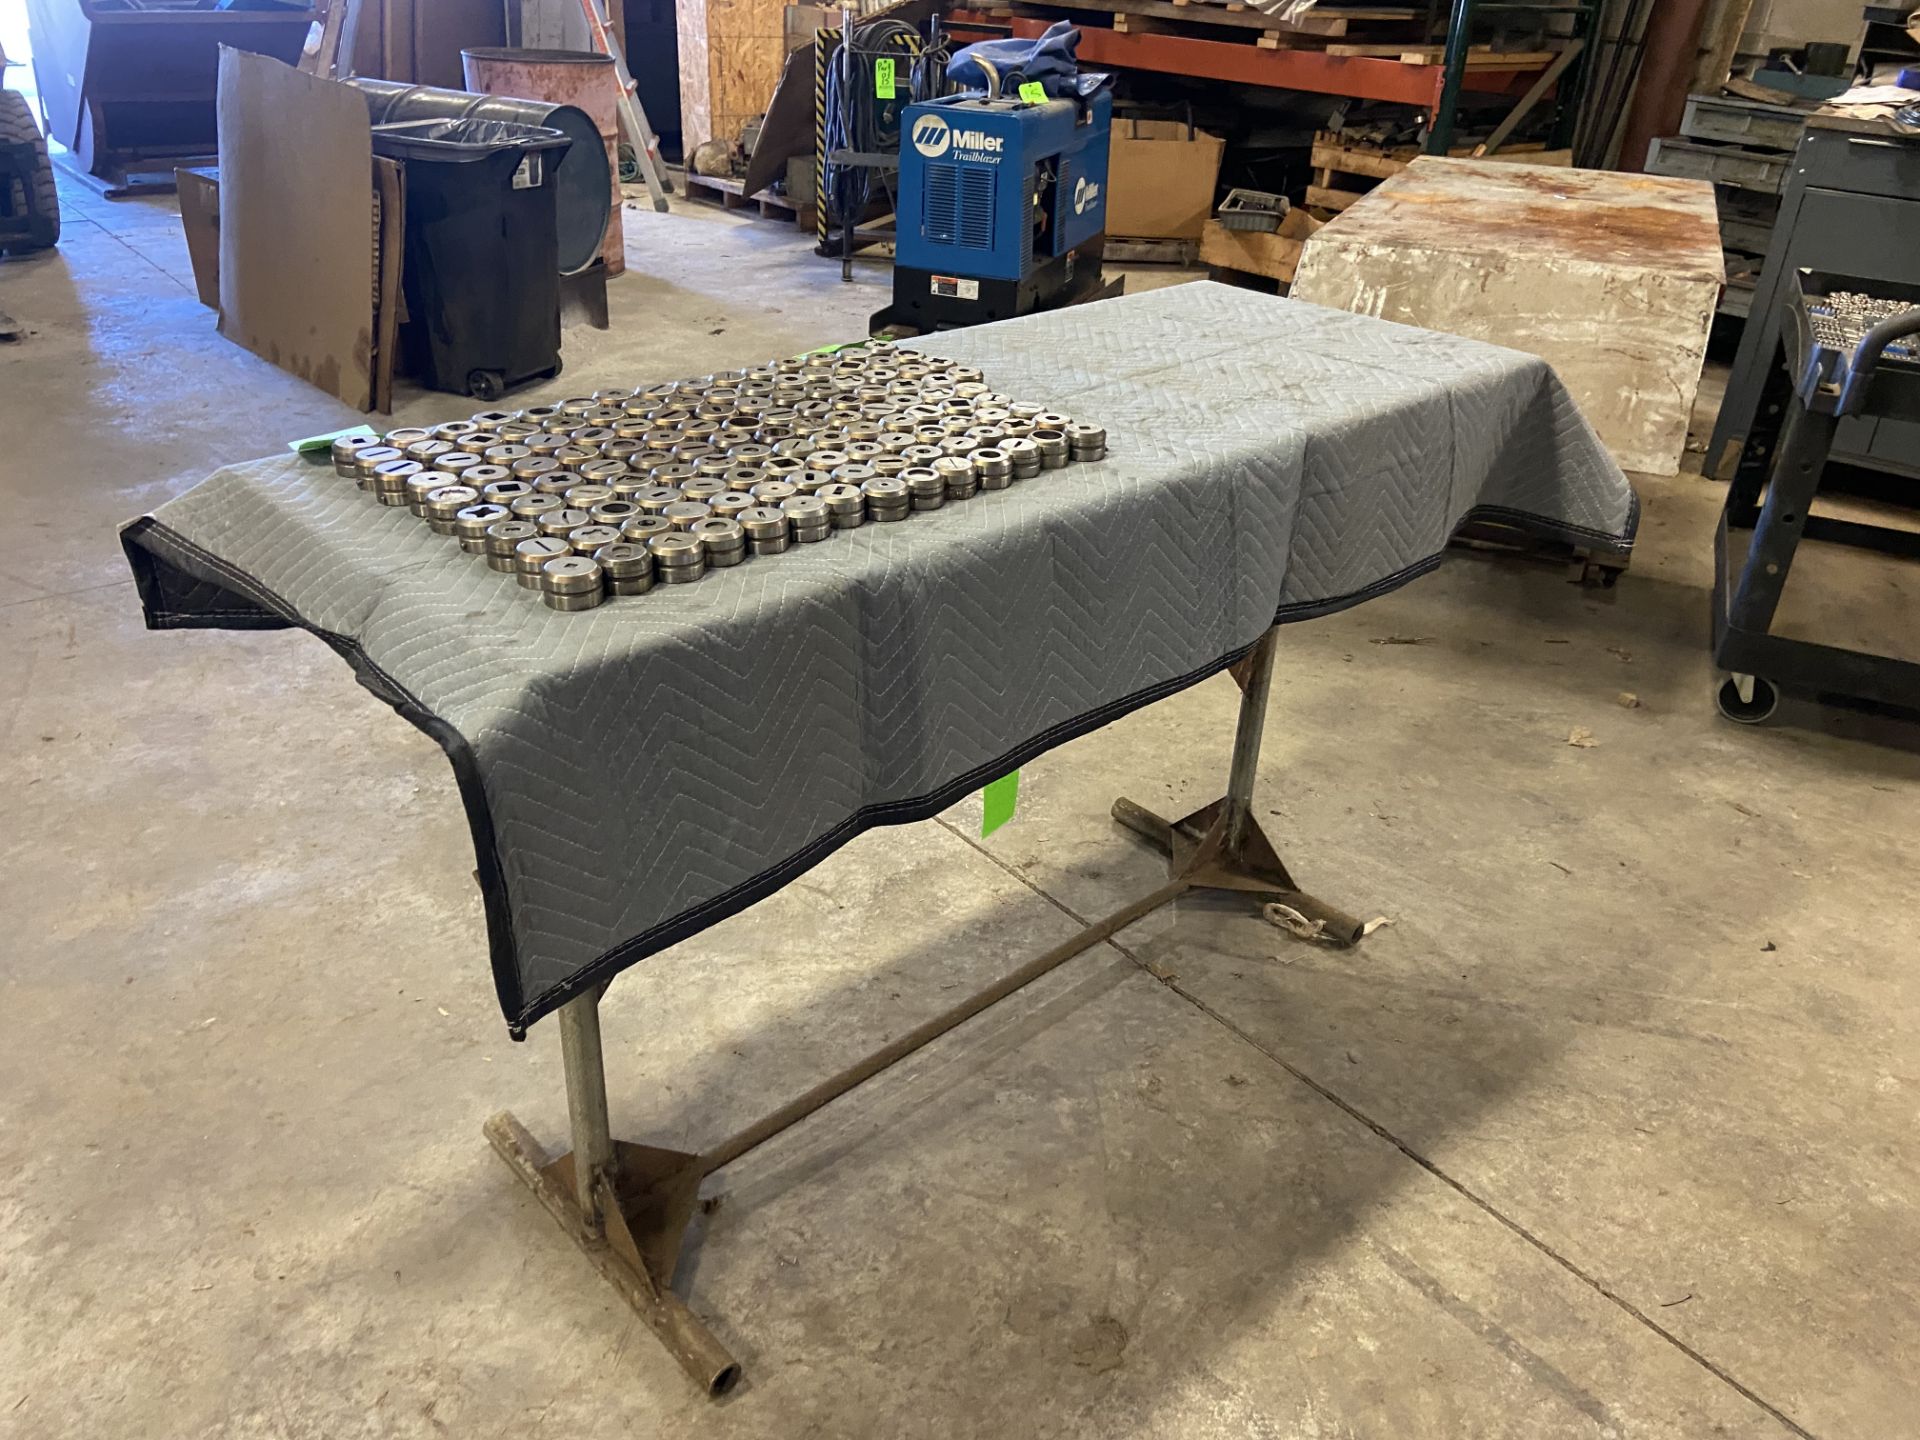 Shop Table, Overall Dims.: Aprox. 60” L x 23” W x 38” H - Image 2 of 2